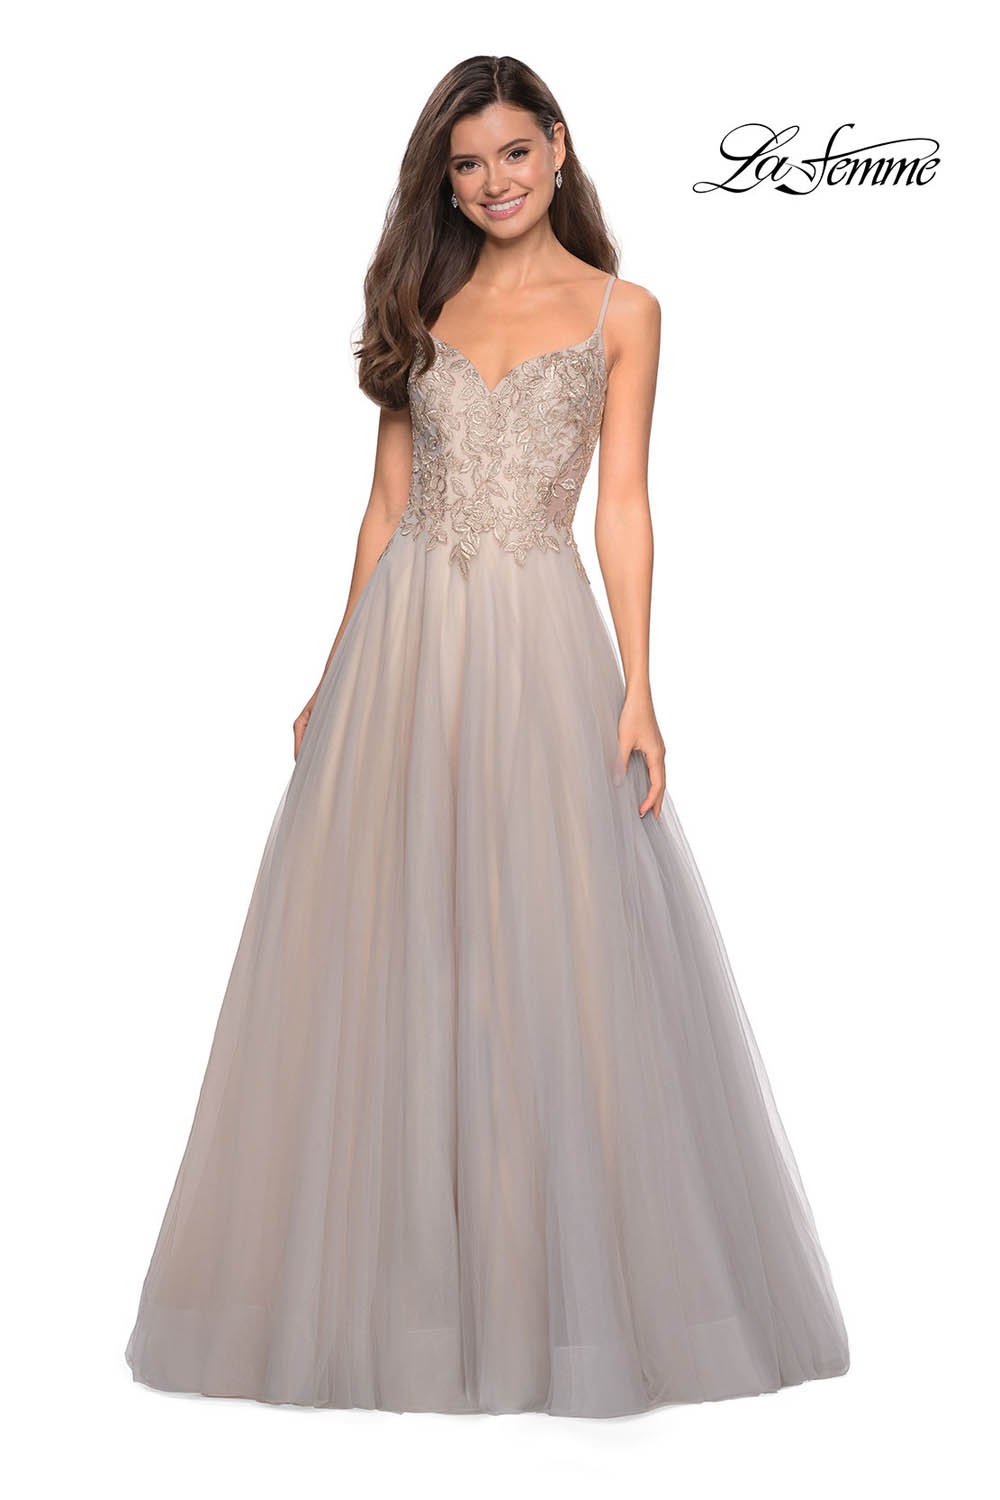 La Femme 27674 dress images in these colors: Gray Nude.